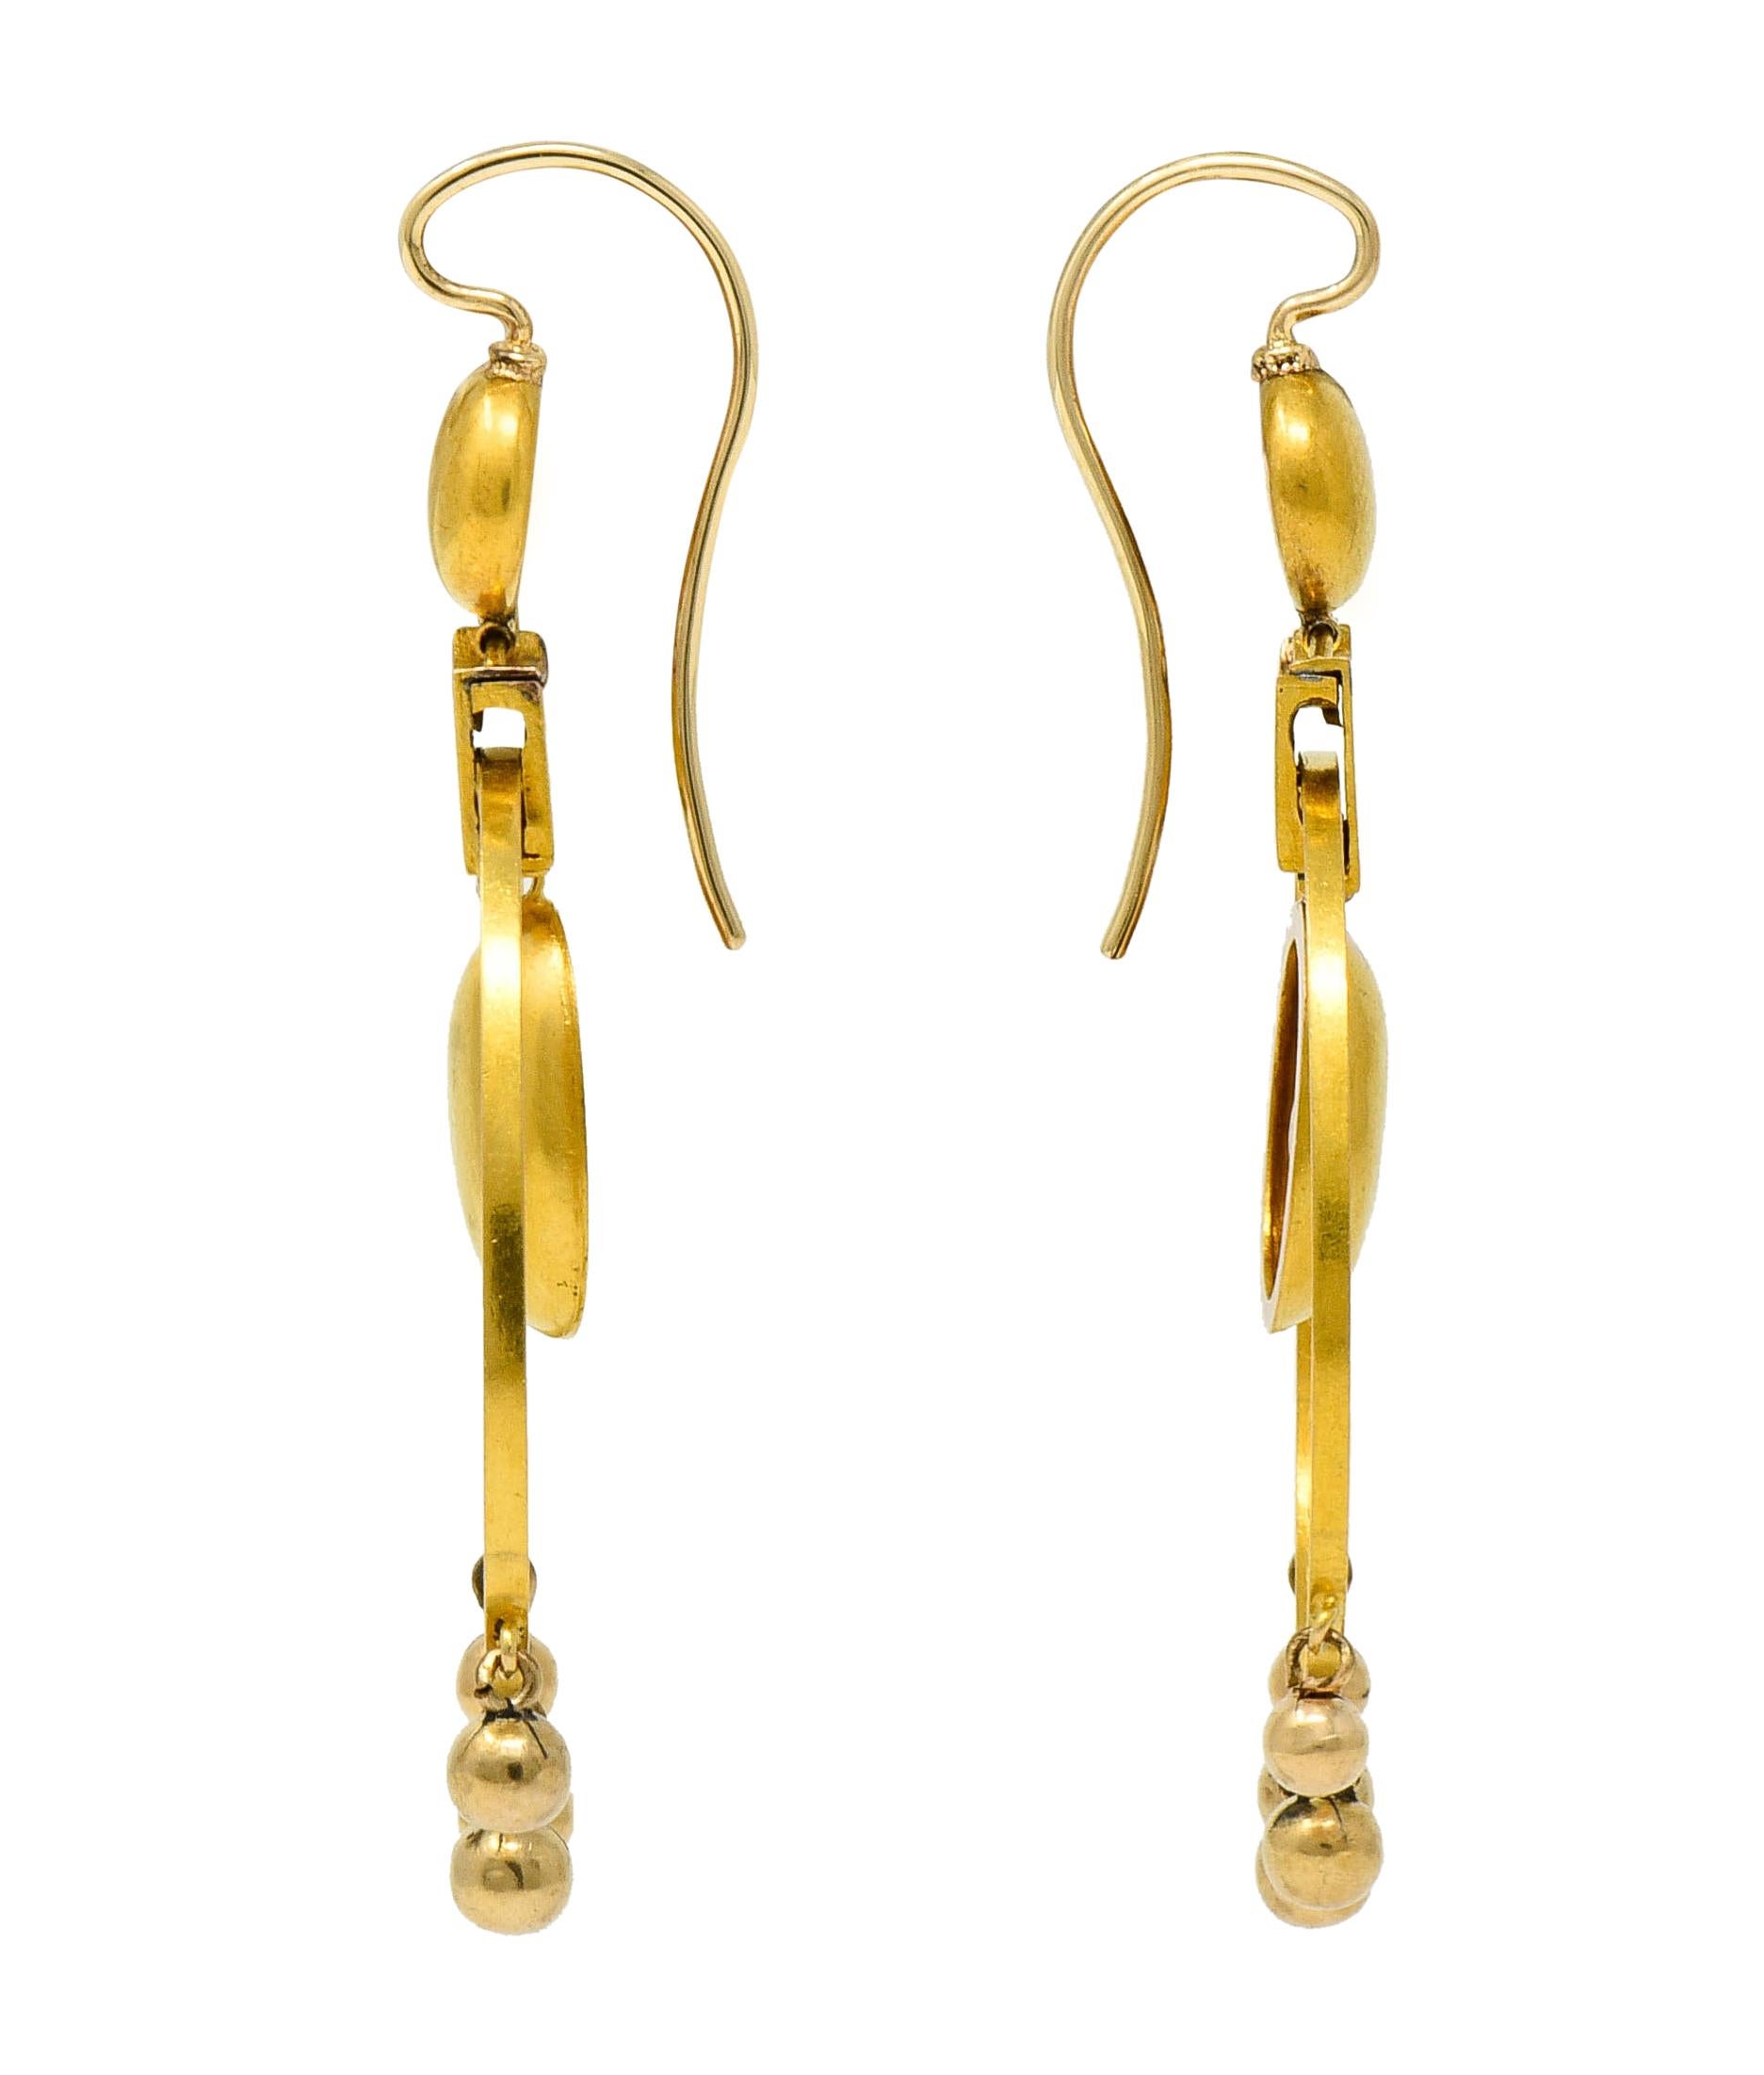 Large lightweight chandelier earrings designed with two domed forms, a round surmount and oval center

With an articulated matte gold surround accented by festive gold bead drops

Completed by a shepherd's hook ear wire

Tested as 18 karat